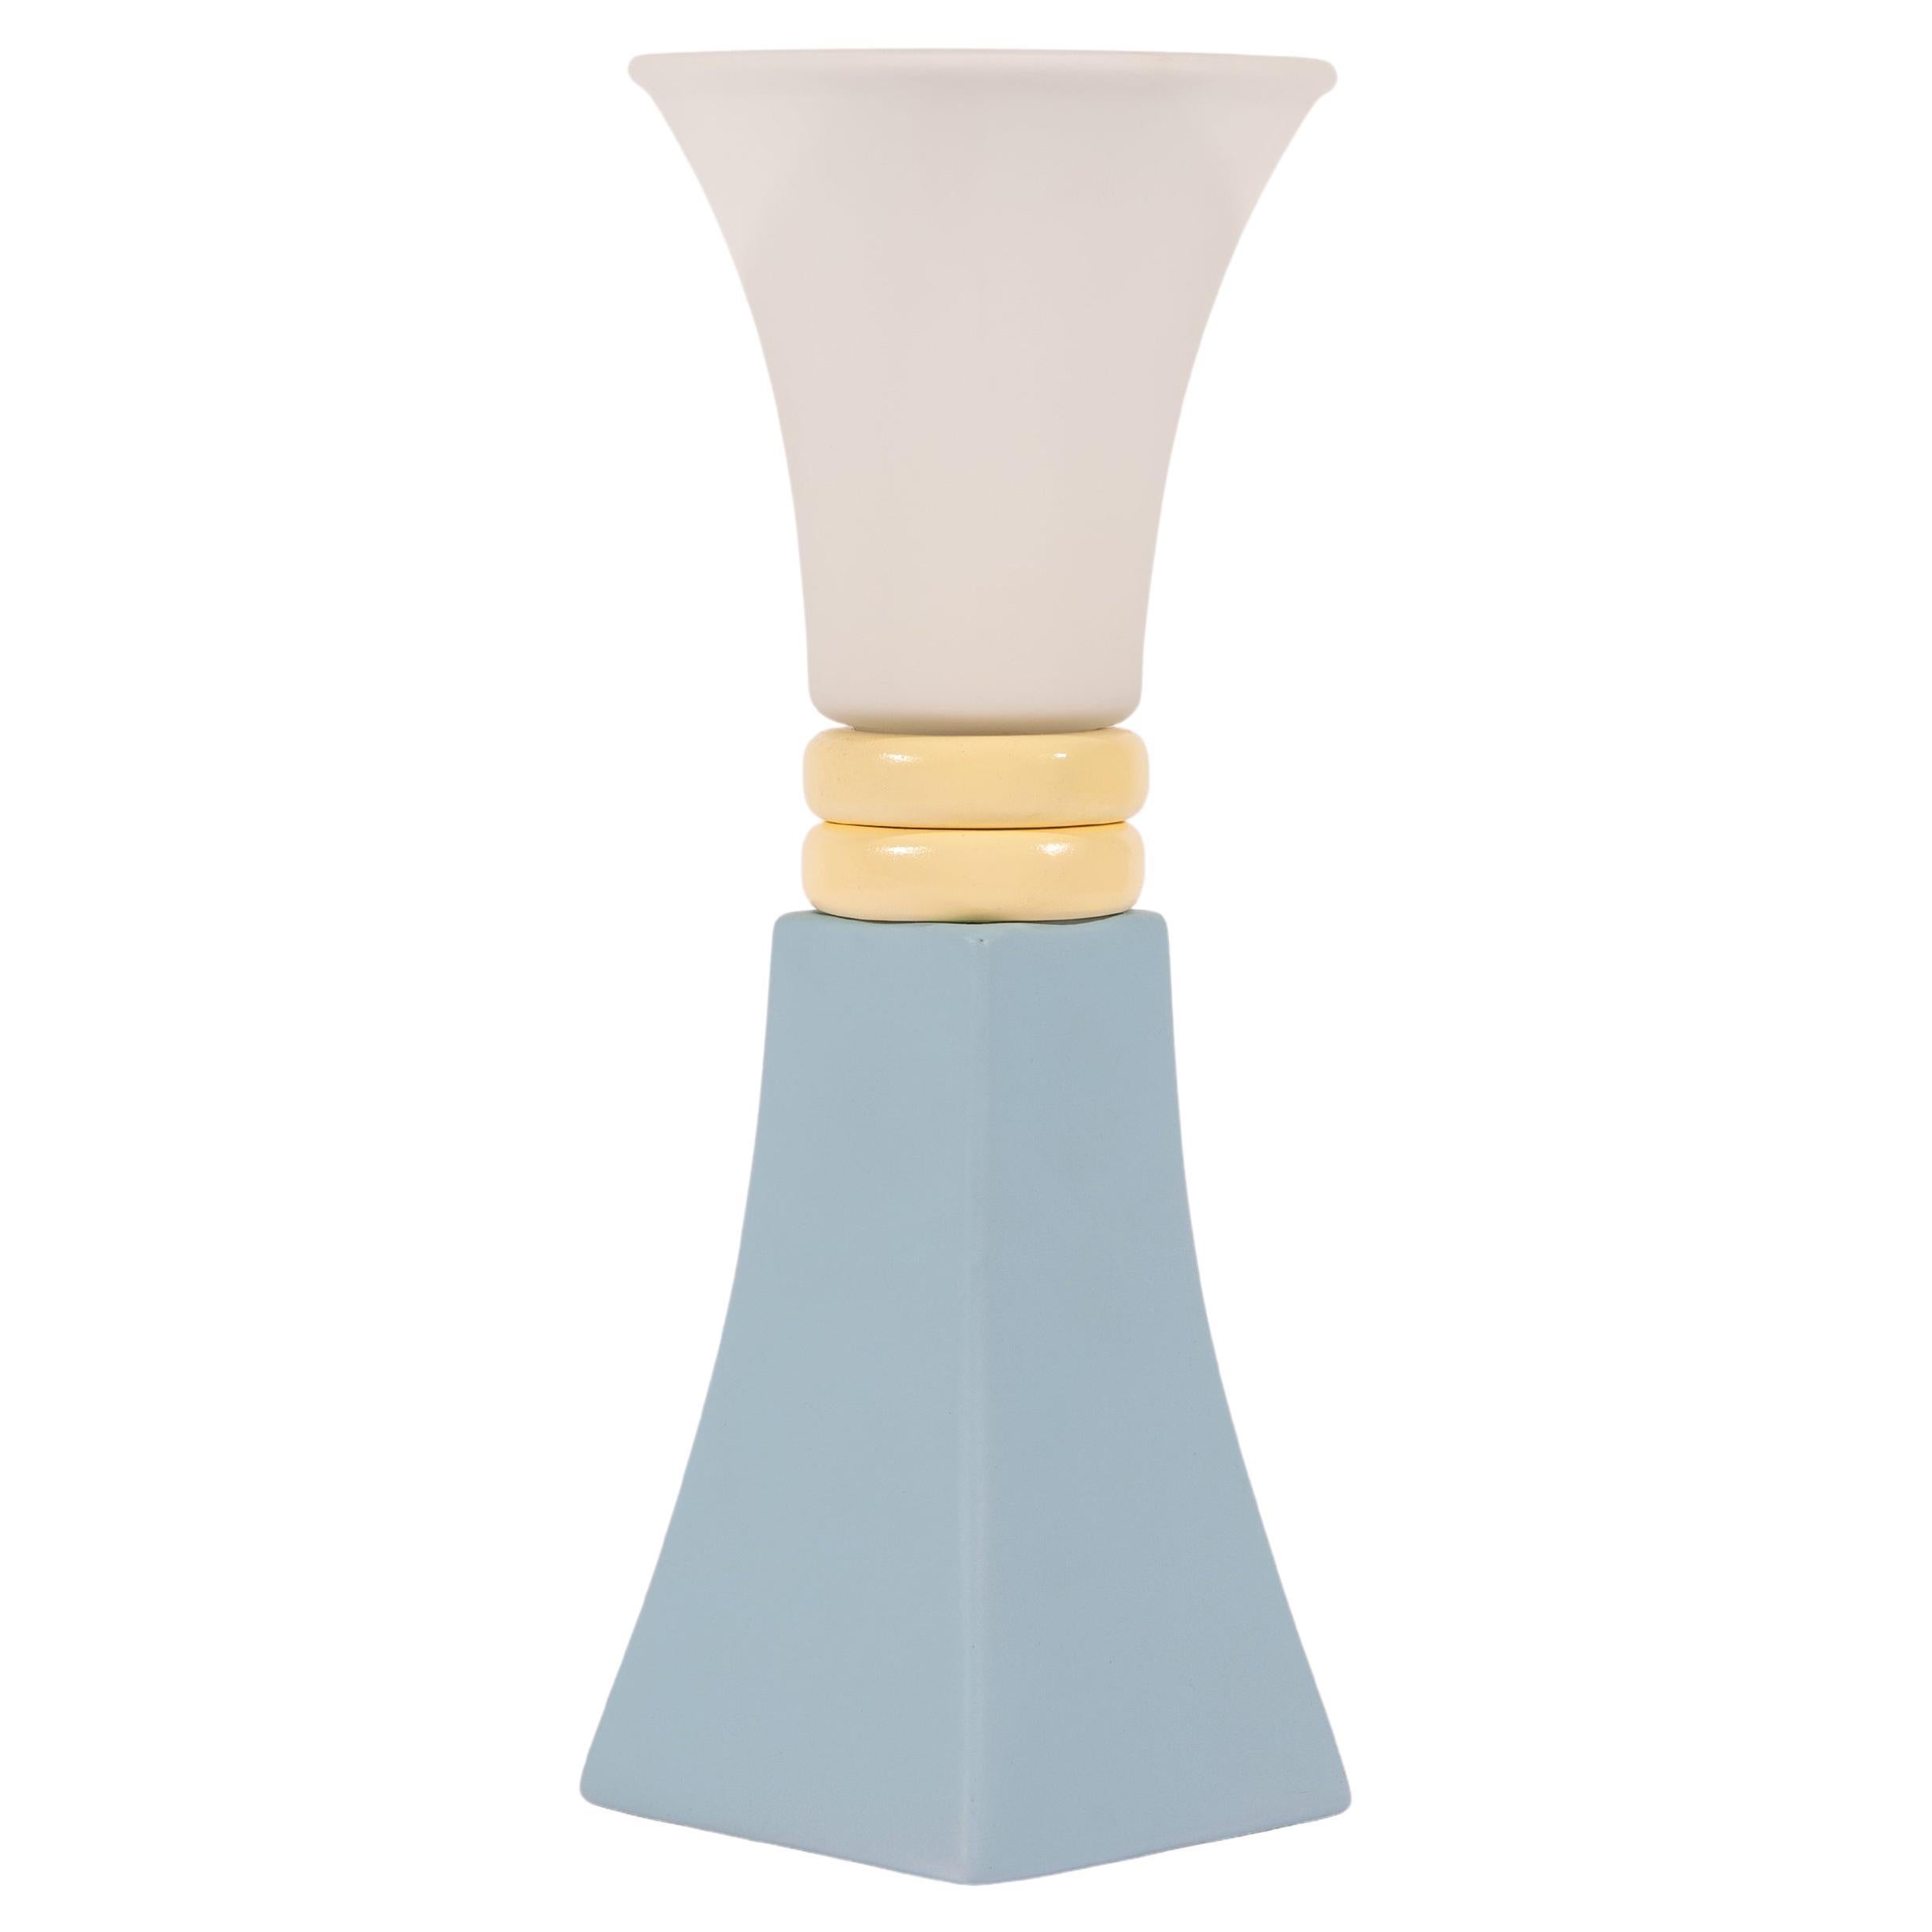 Light Blue and Yellow Unique Contemporary Table Lamp by Nusprodukt